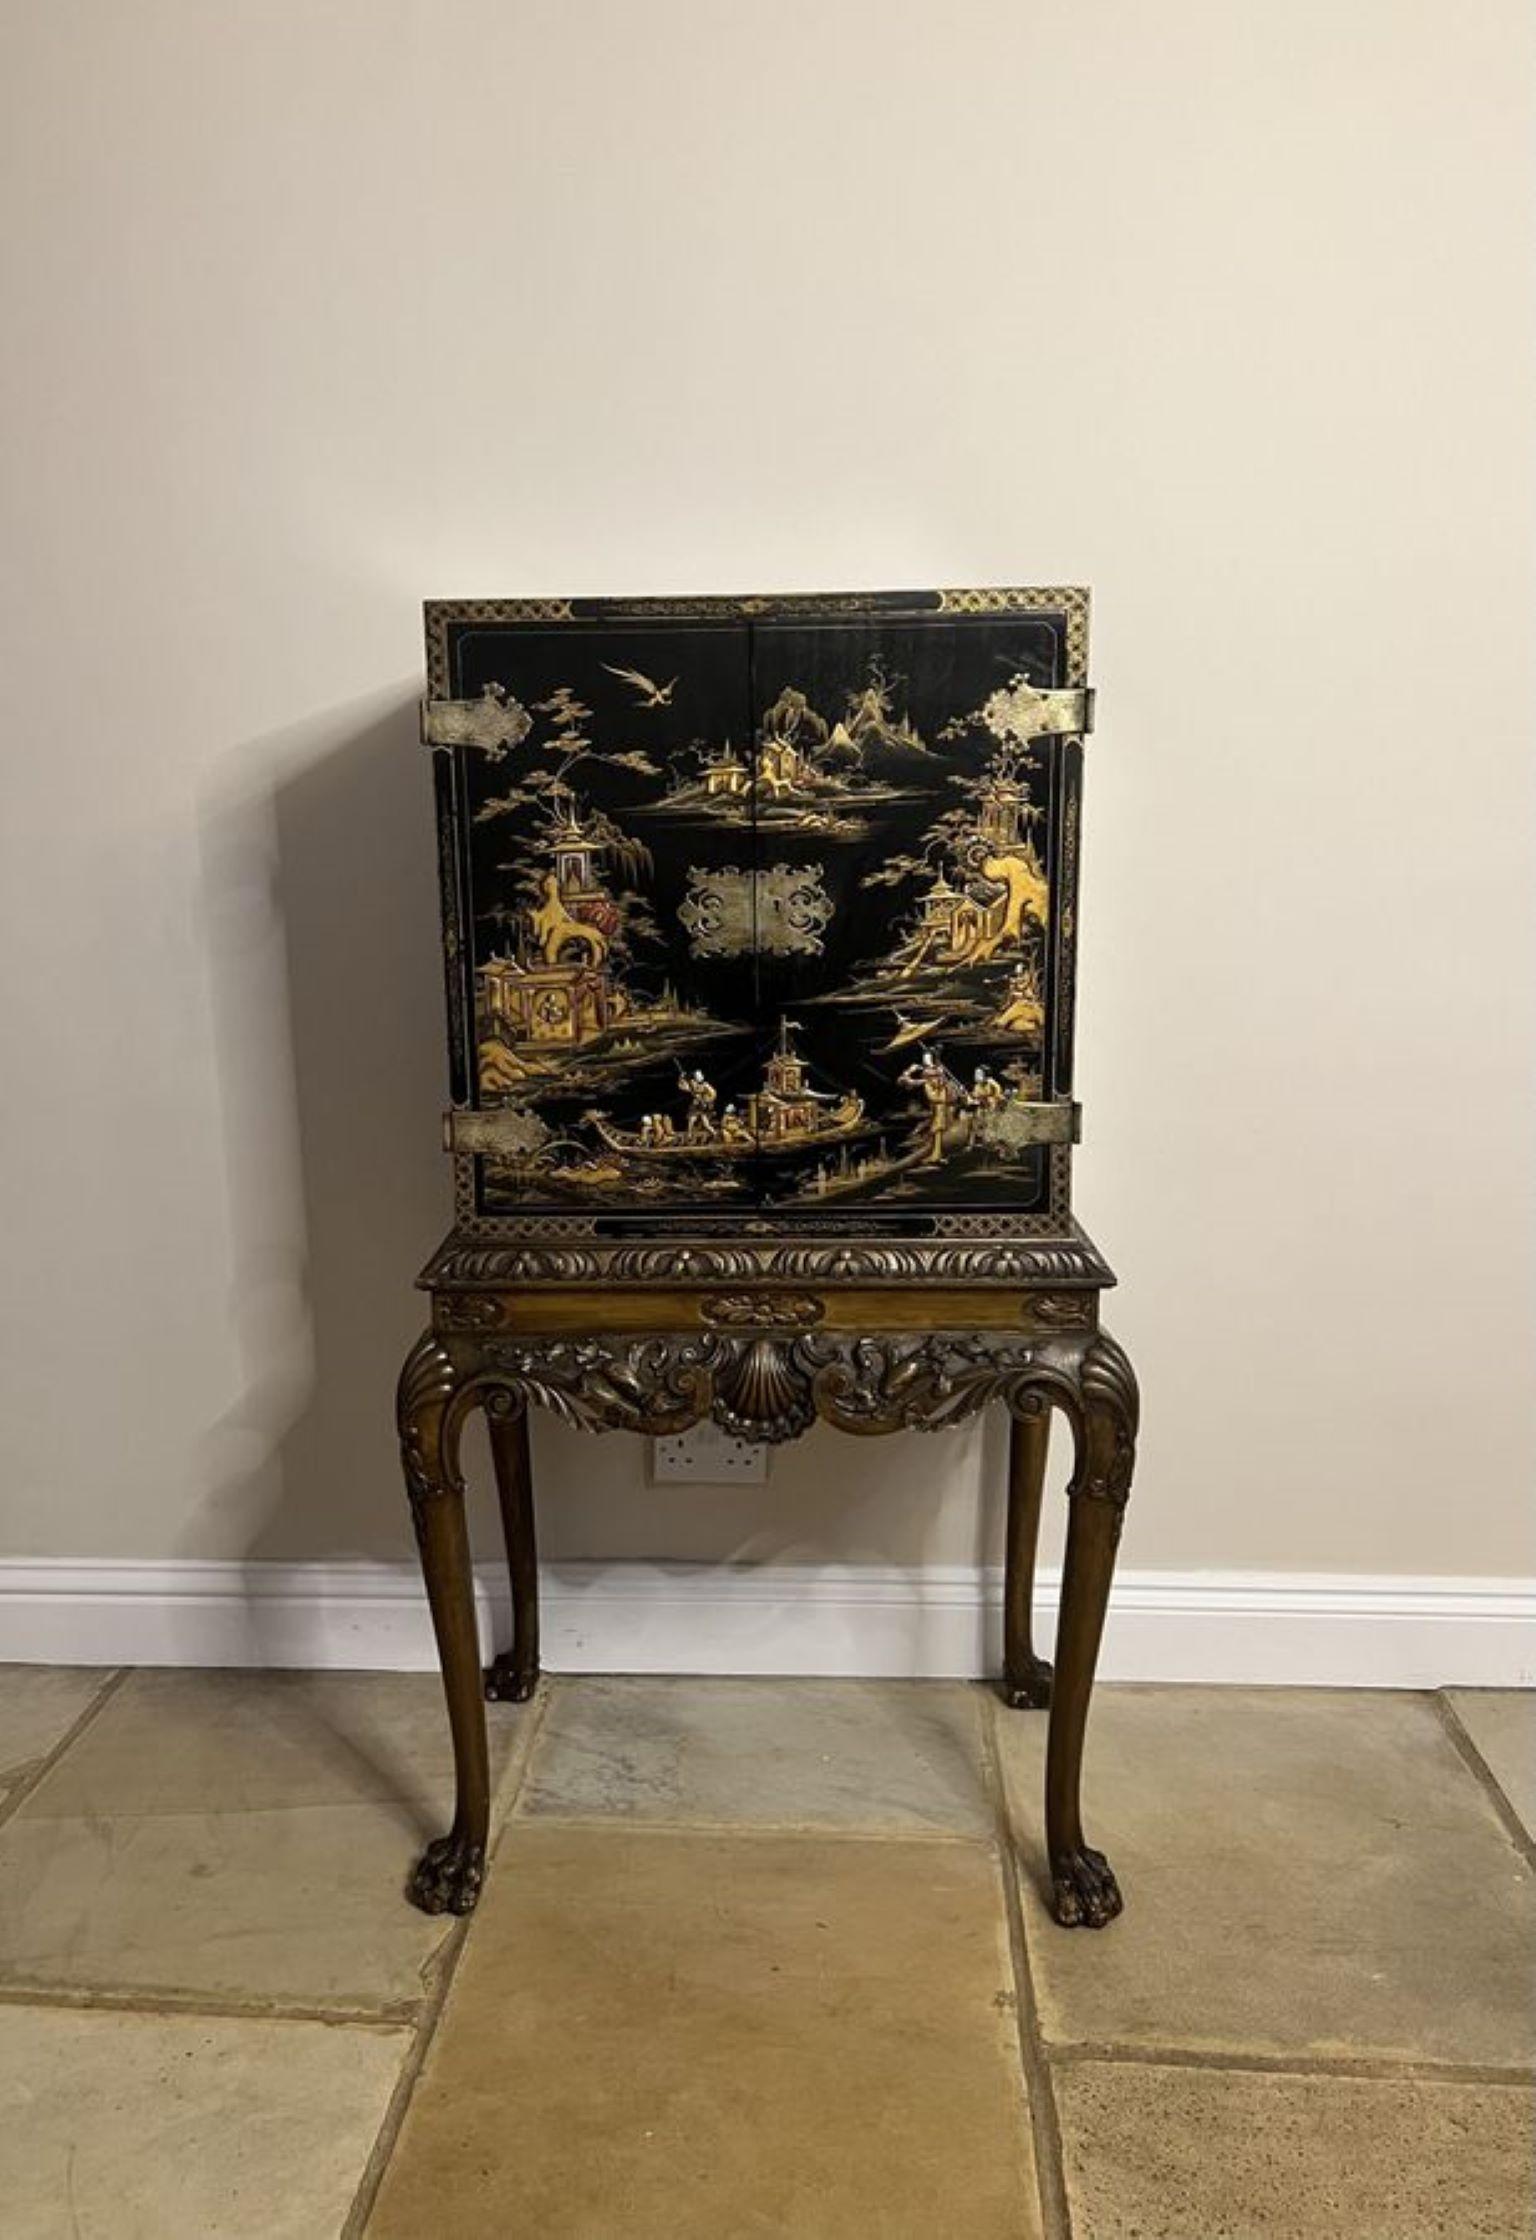 Outstanding quality antique Edwardian chinoiserie decorated cabinet on a stand, having a pair of outstanding quality chinoiserie decorated doors with original ornate brass hinges and lock plate, opening to reveal a shelf interior, chinoiserie